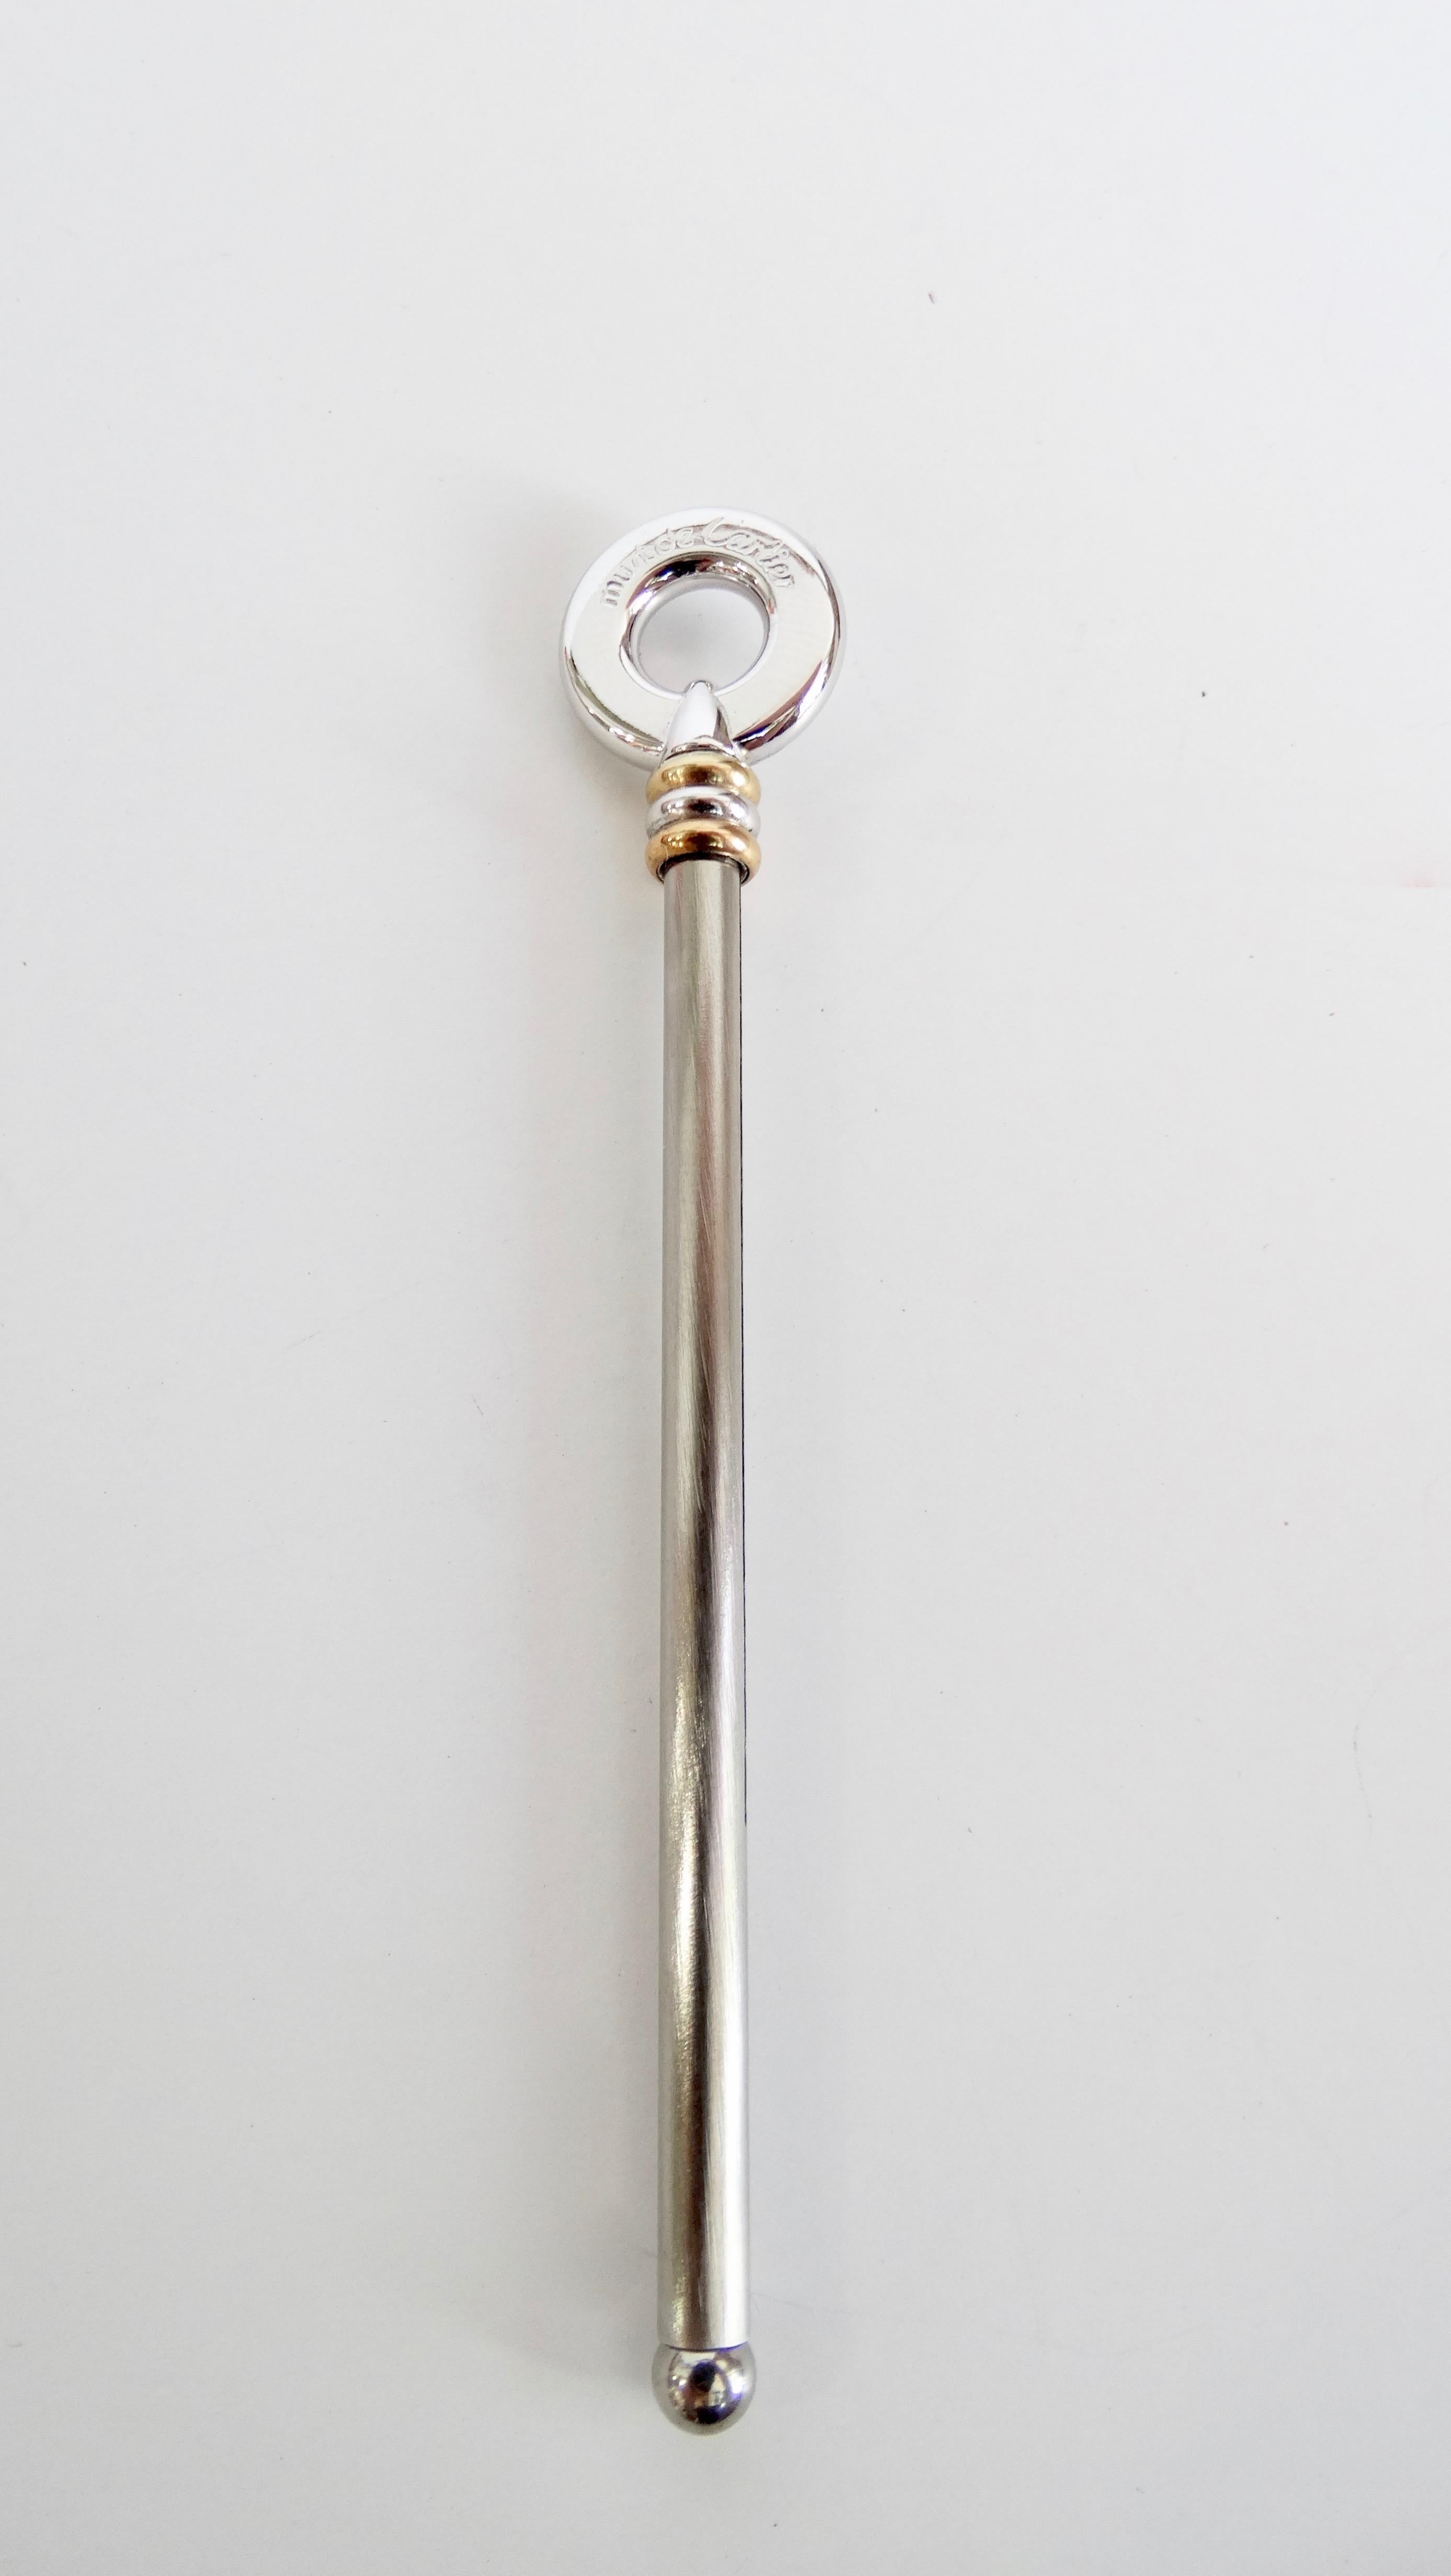 Gorgeous rare Cartier mixed precious metal swizzle stick circa 1989. Crafted in palladium and 18k gold. Features 3 ring design which releases the retractable whisk. The object is signed on the ring, 'Cartier Paris' and 'C Cartier 1989'. Measures